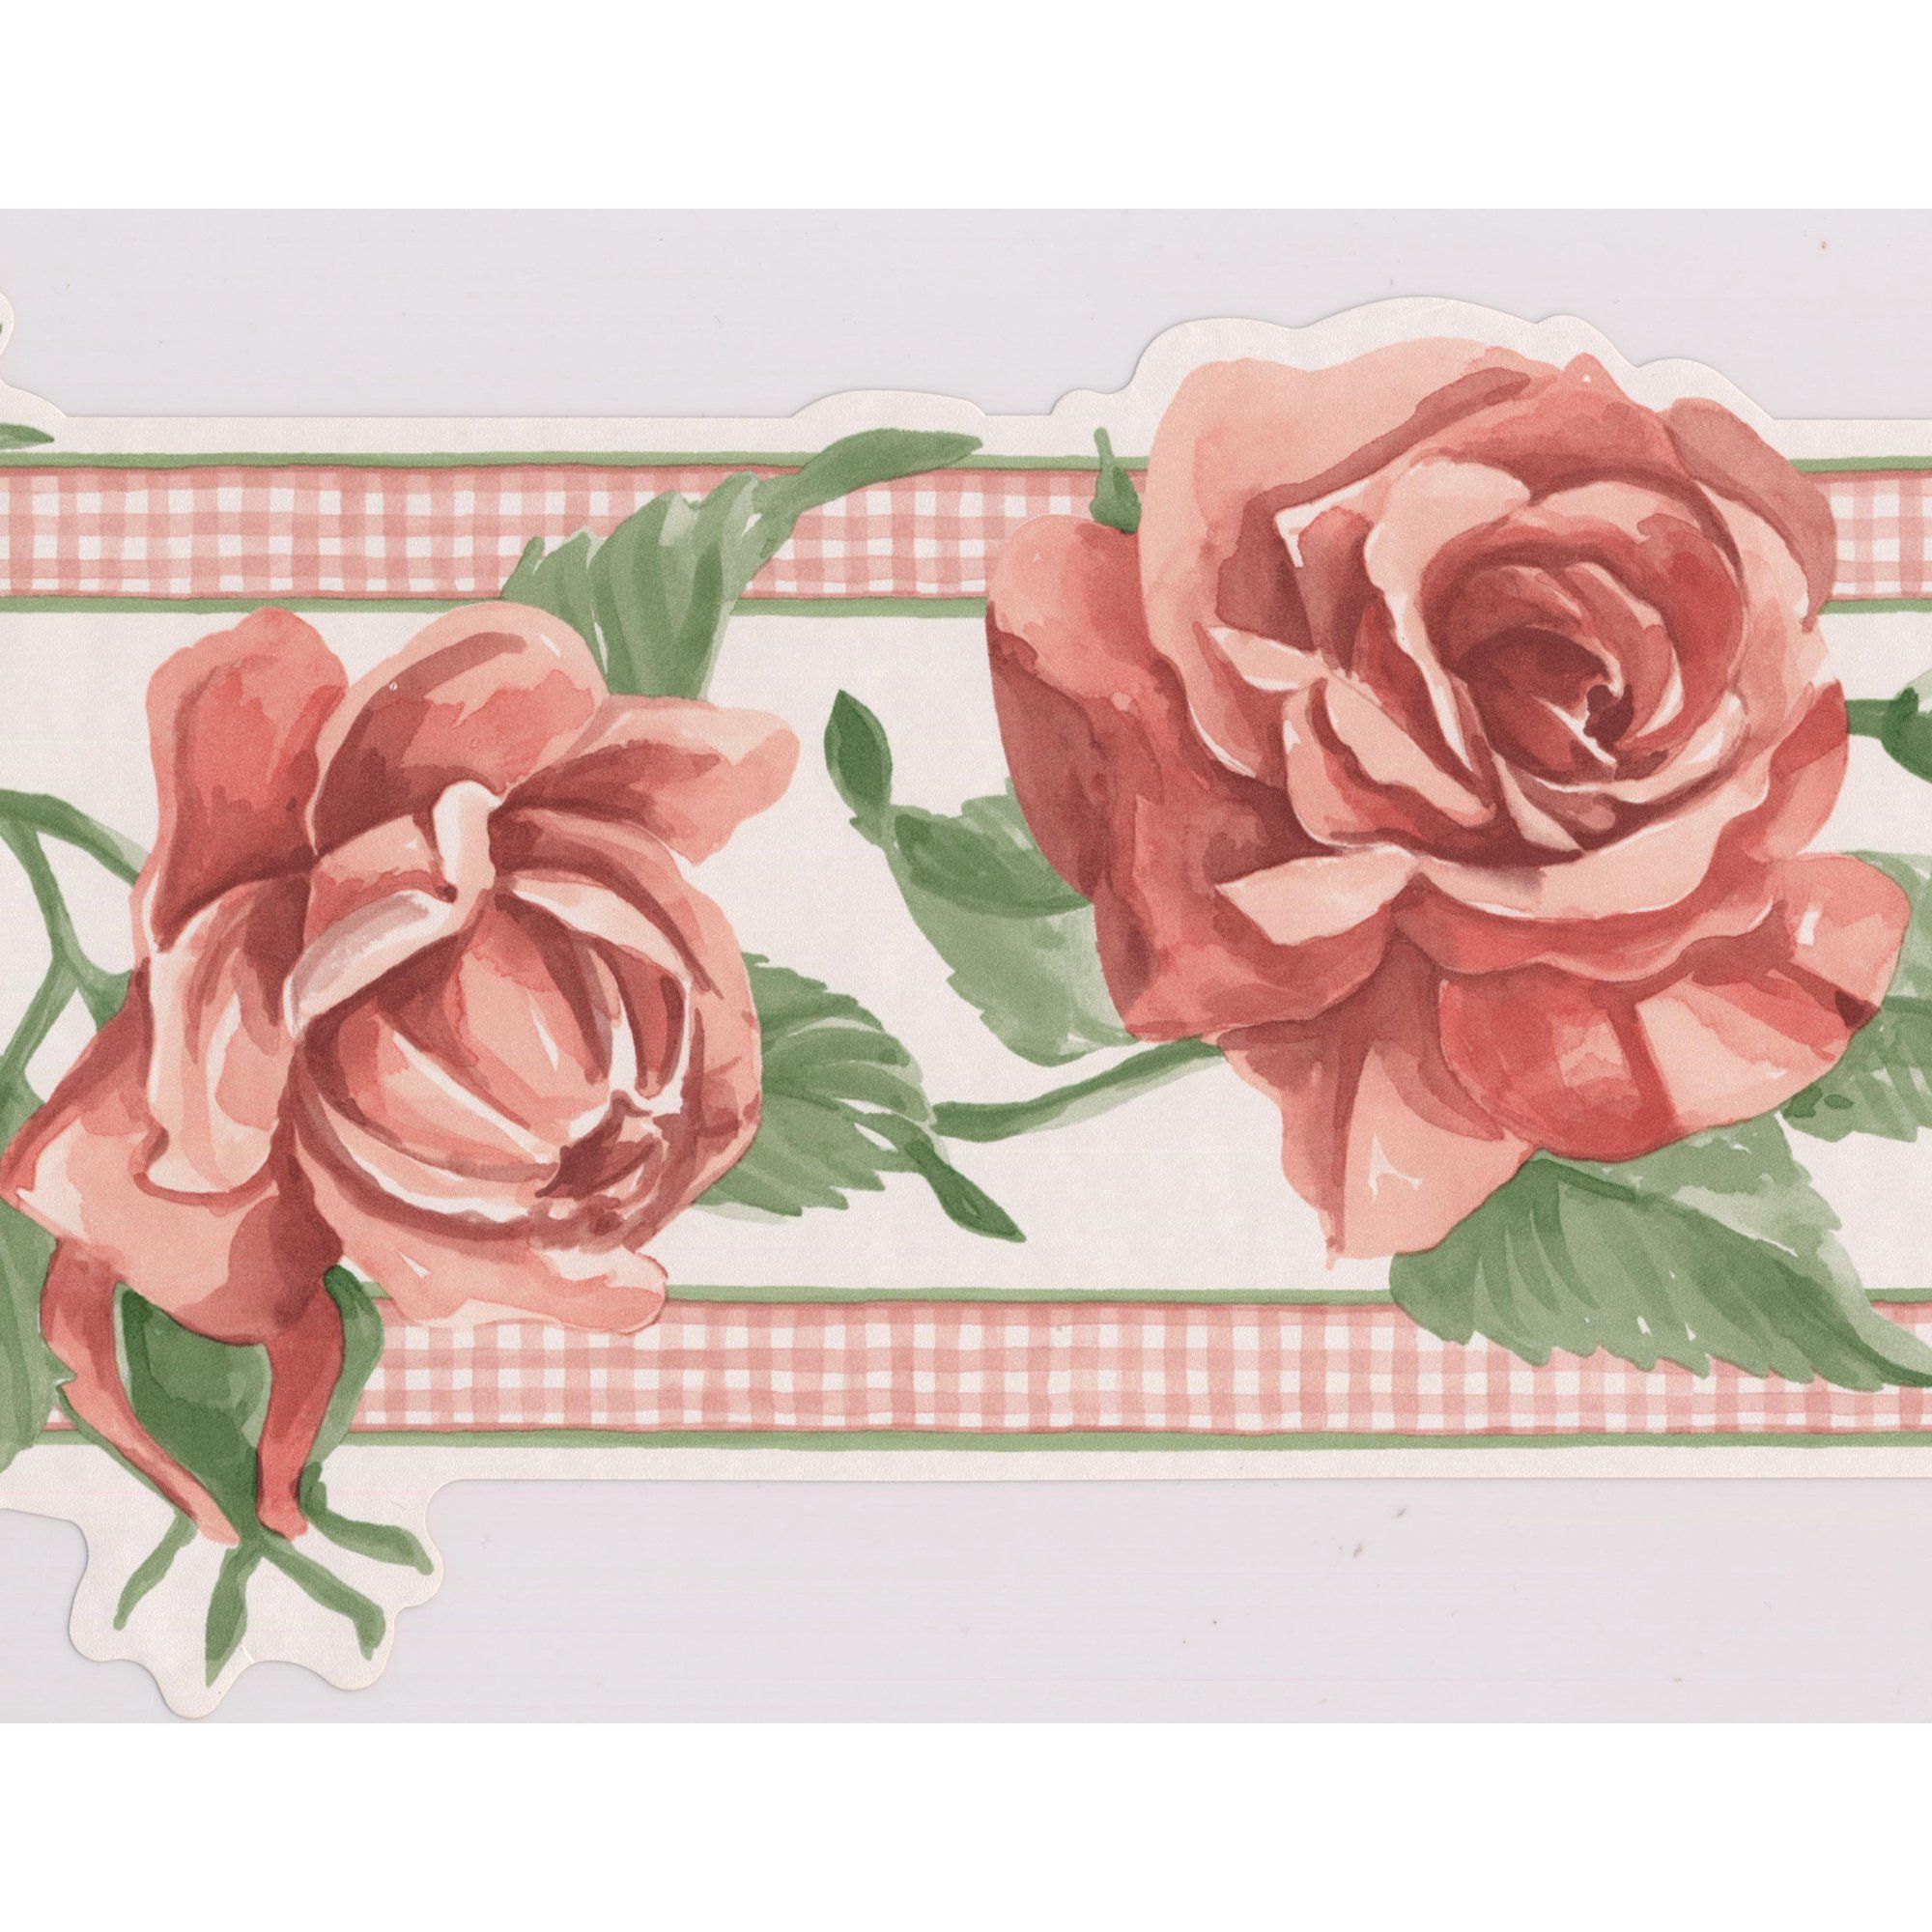 Blooming Pink Red Roses on Vine Floral Wallpaper Border Retro